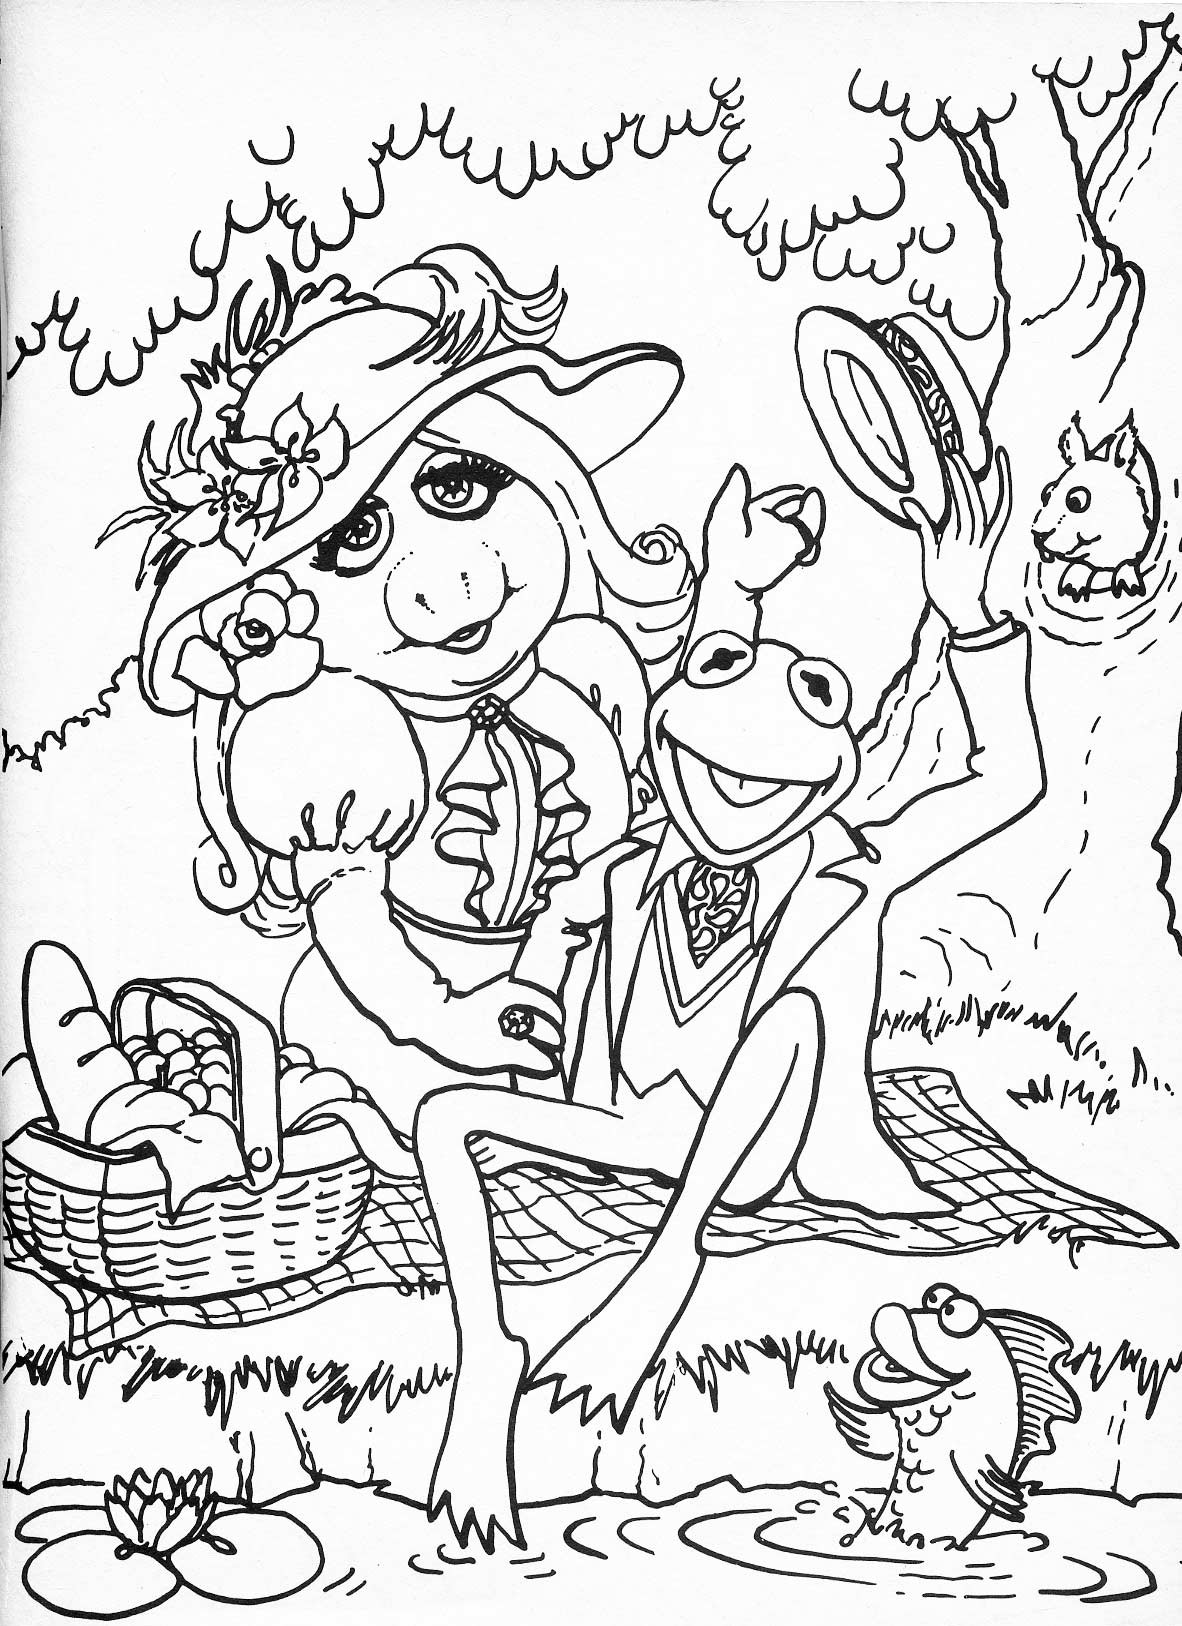 Muppets Coloring Book Pages
 Kermit The Frog And Miss Piggy Coloring Pages